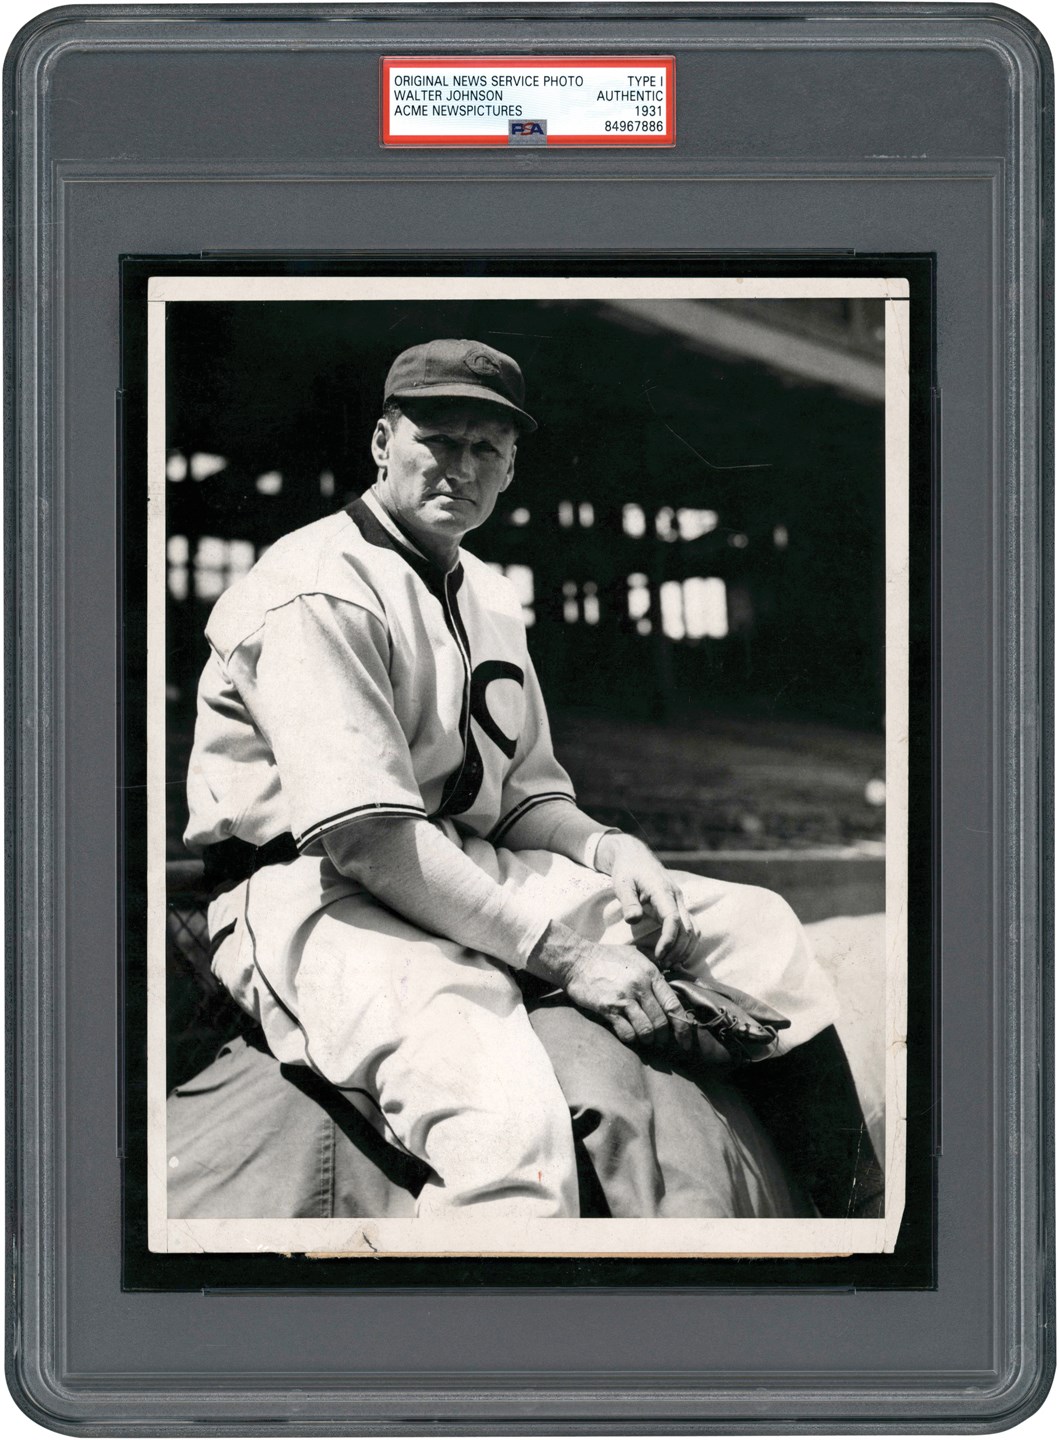 - 1933 Walter Johnson First Game as Cleveland Indians Manager Photograph (PSA Type I)